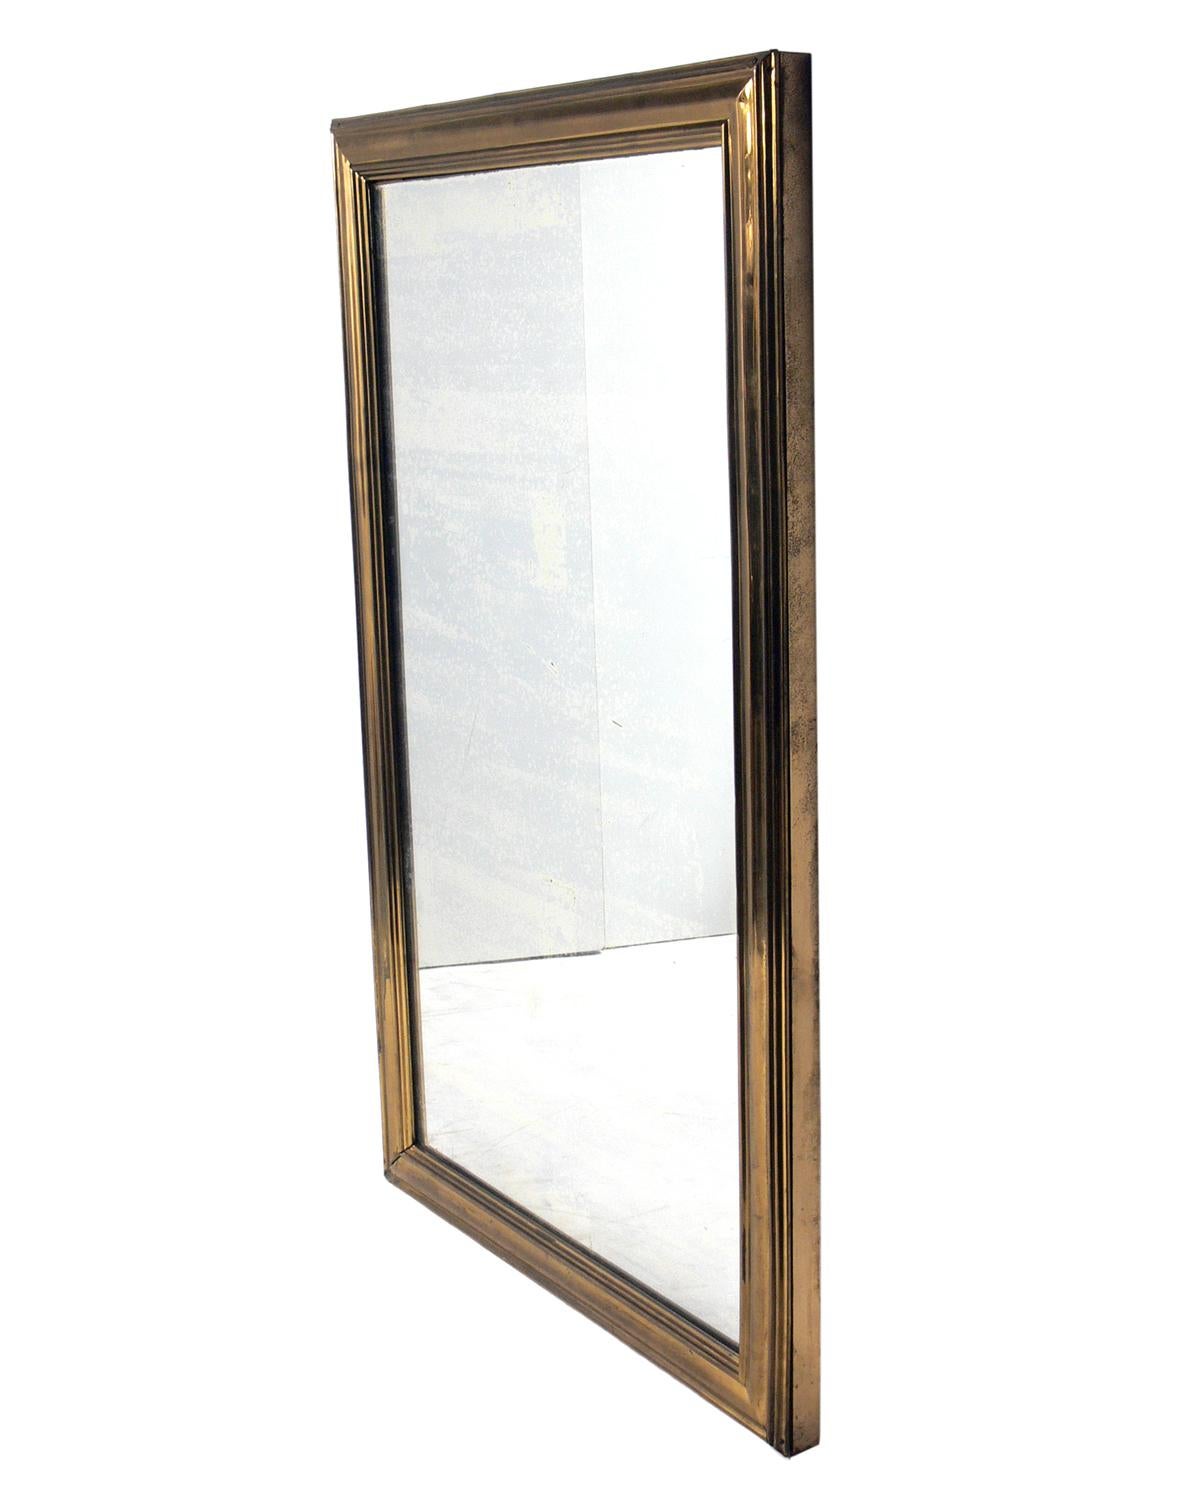 Large-scale 19th century brass mirror, circa 1890s. Retains wonderful original patina to the original mirrored glass and the brass frame.